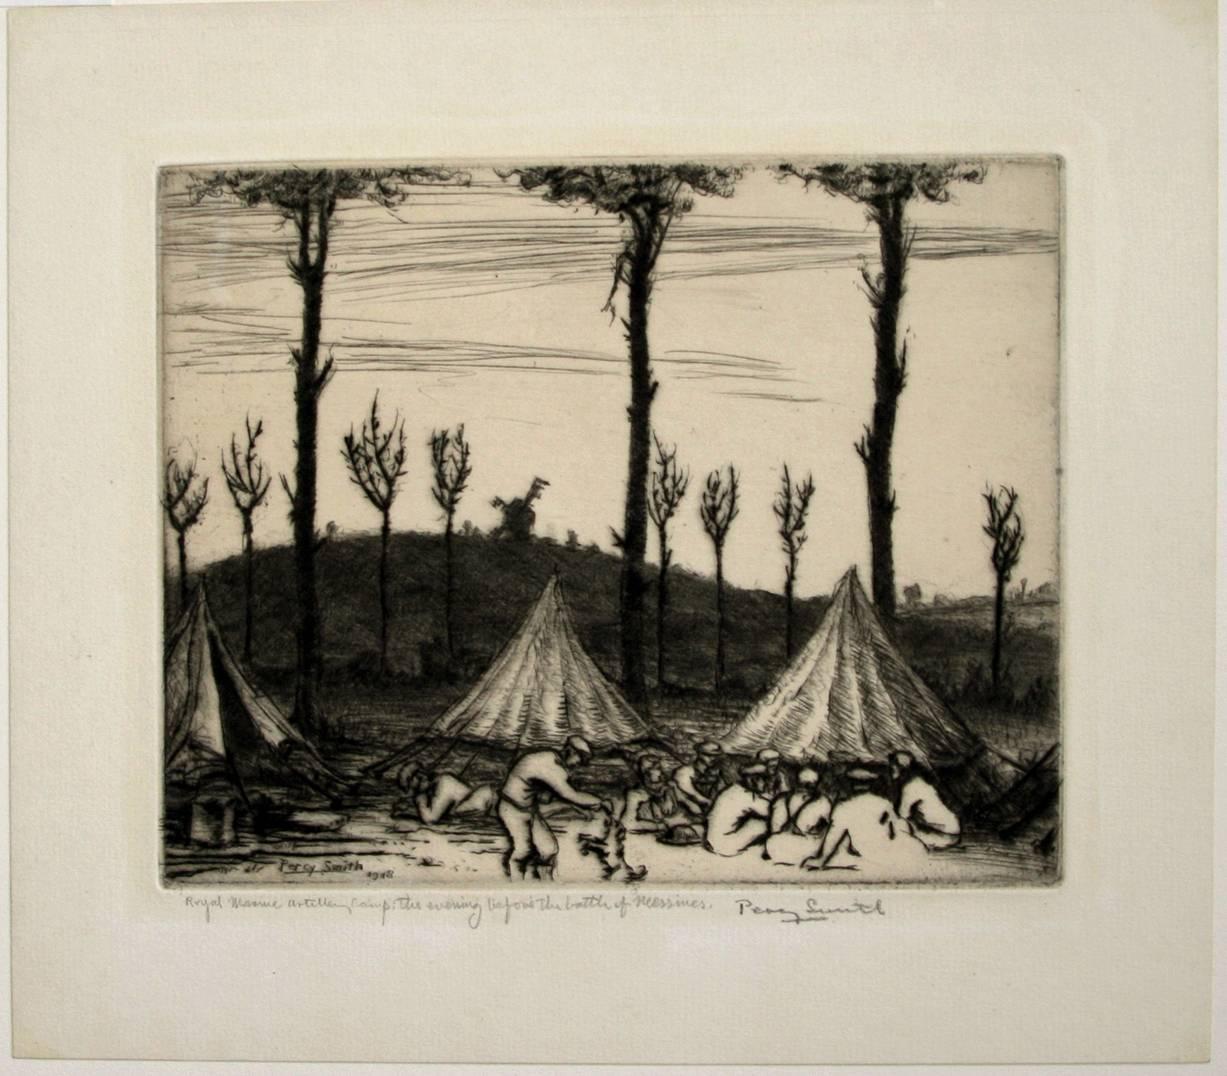 Royal Marine Artillery Camp.  The Evening Before the Battle of Messines.  - Print by Percy John Delf Smith, R.D.I.